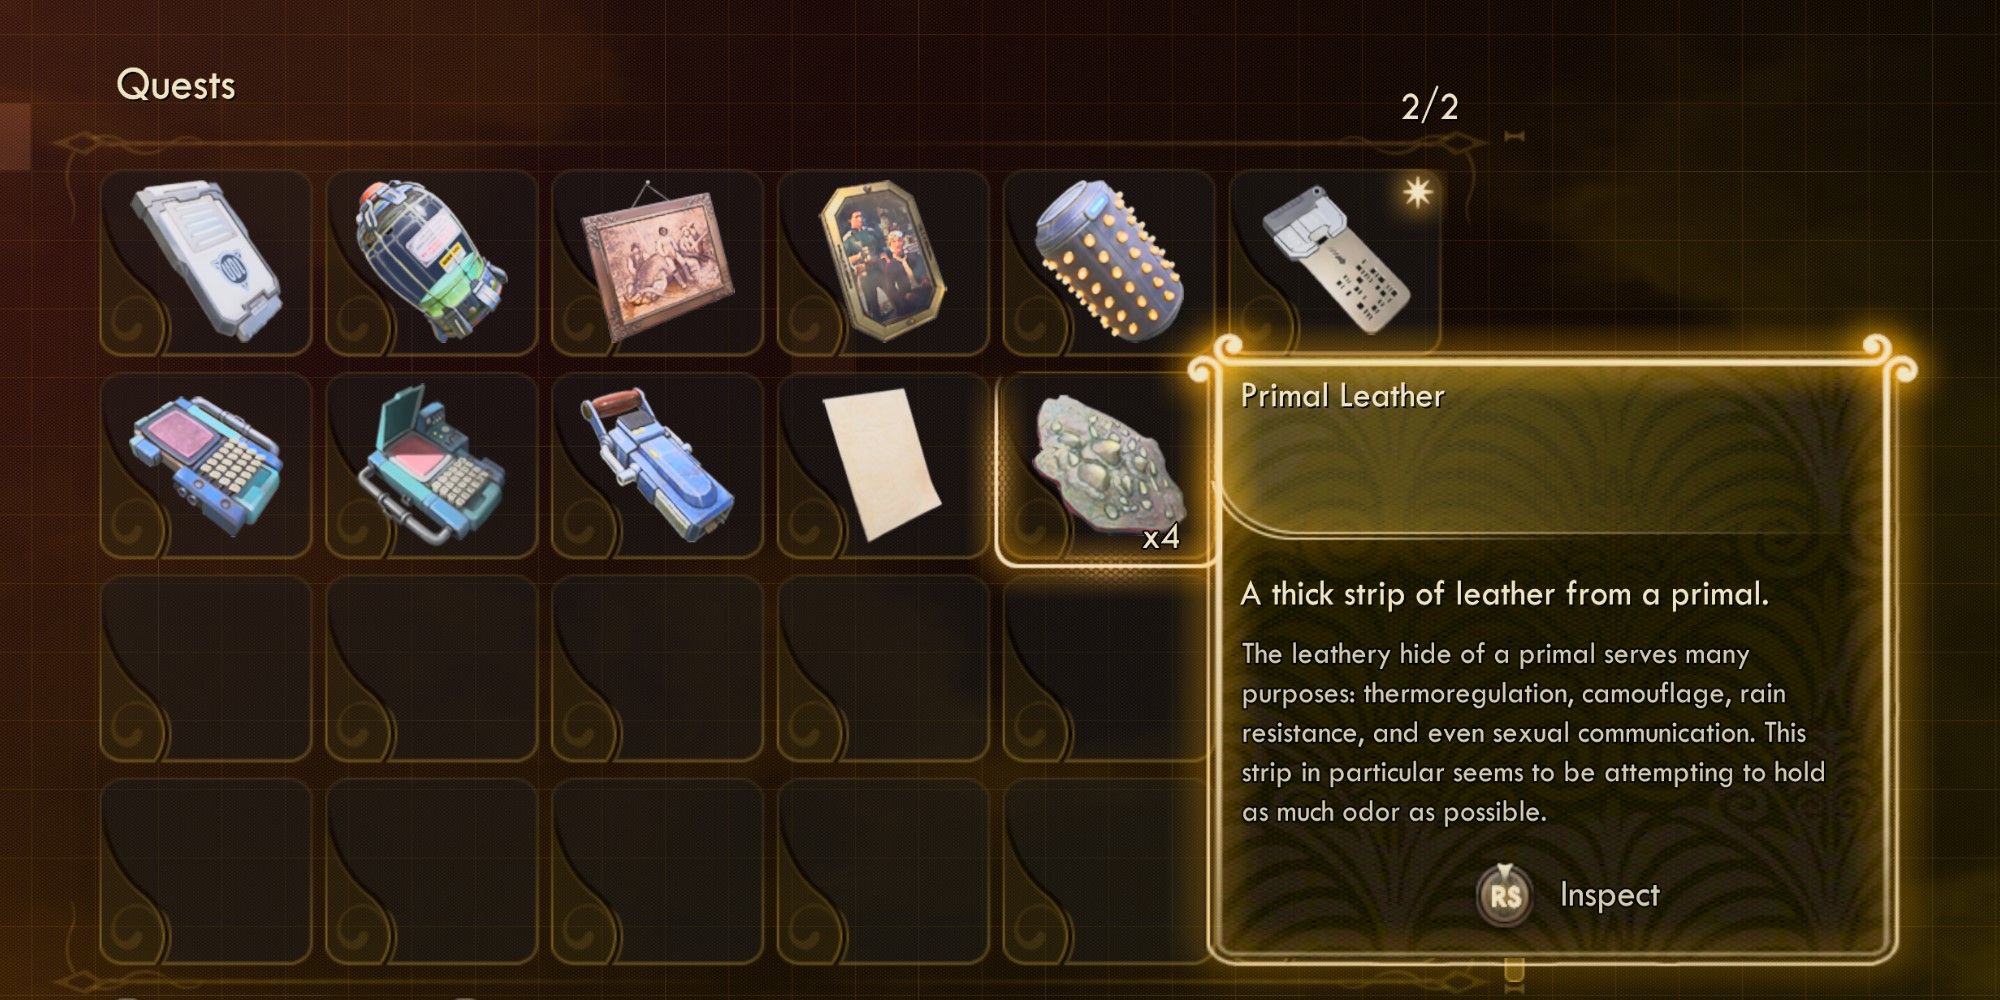 The Outer Worlds Primal Leather in the quests section of the player's inventory